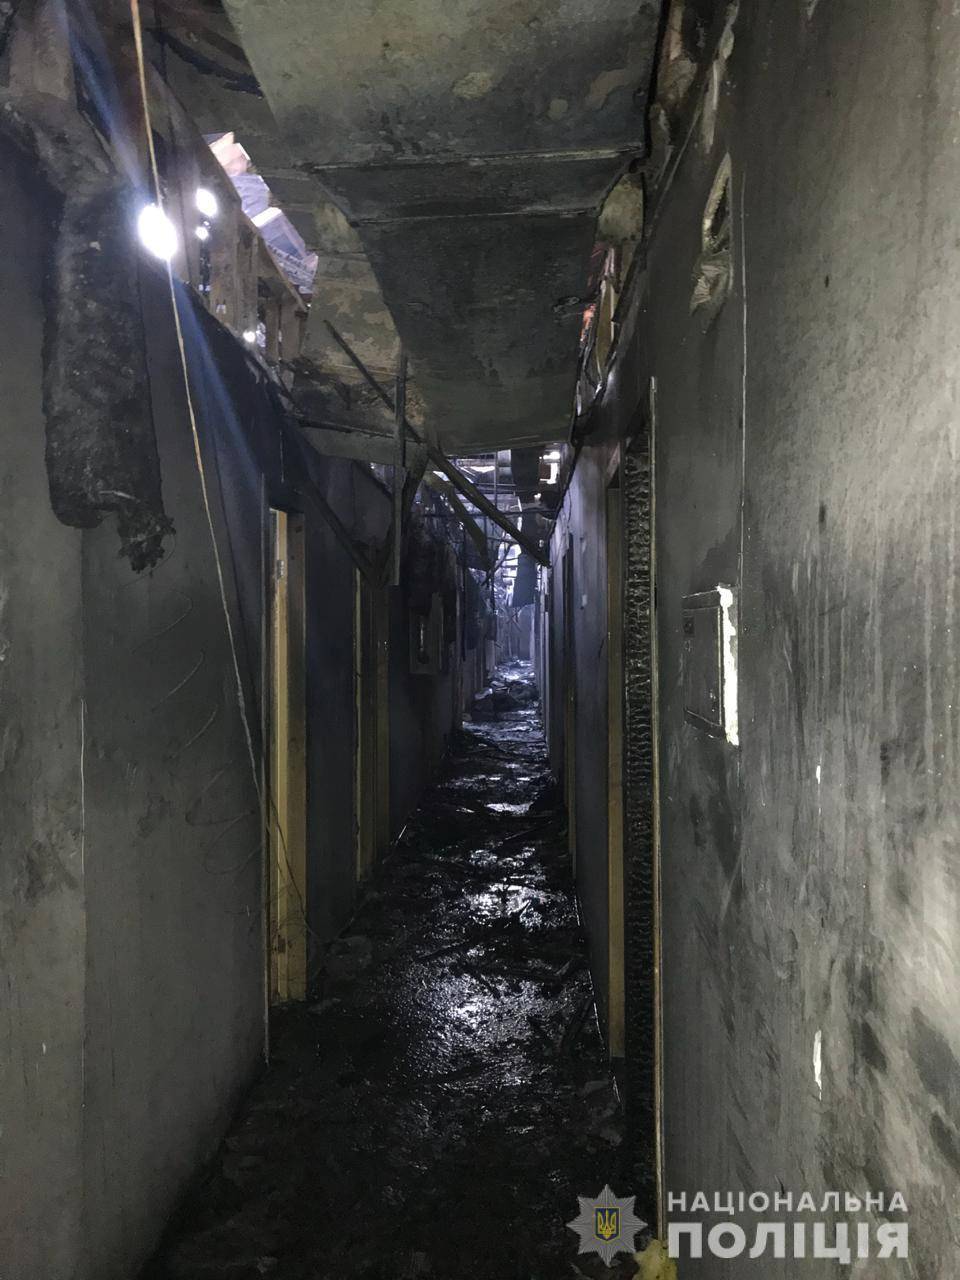 A view shows a corridor of the Tokyo Star hotel that was hit by a heavy fire, in Odessa